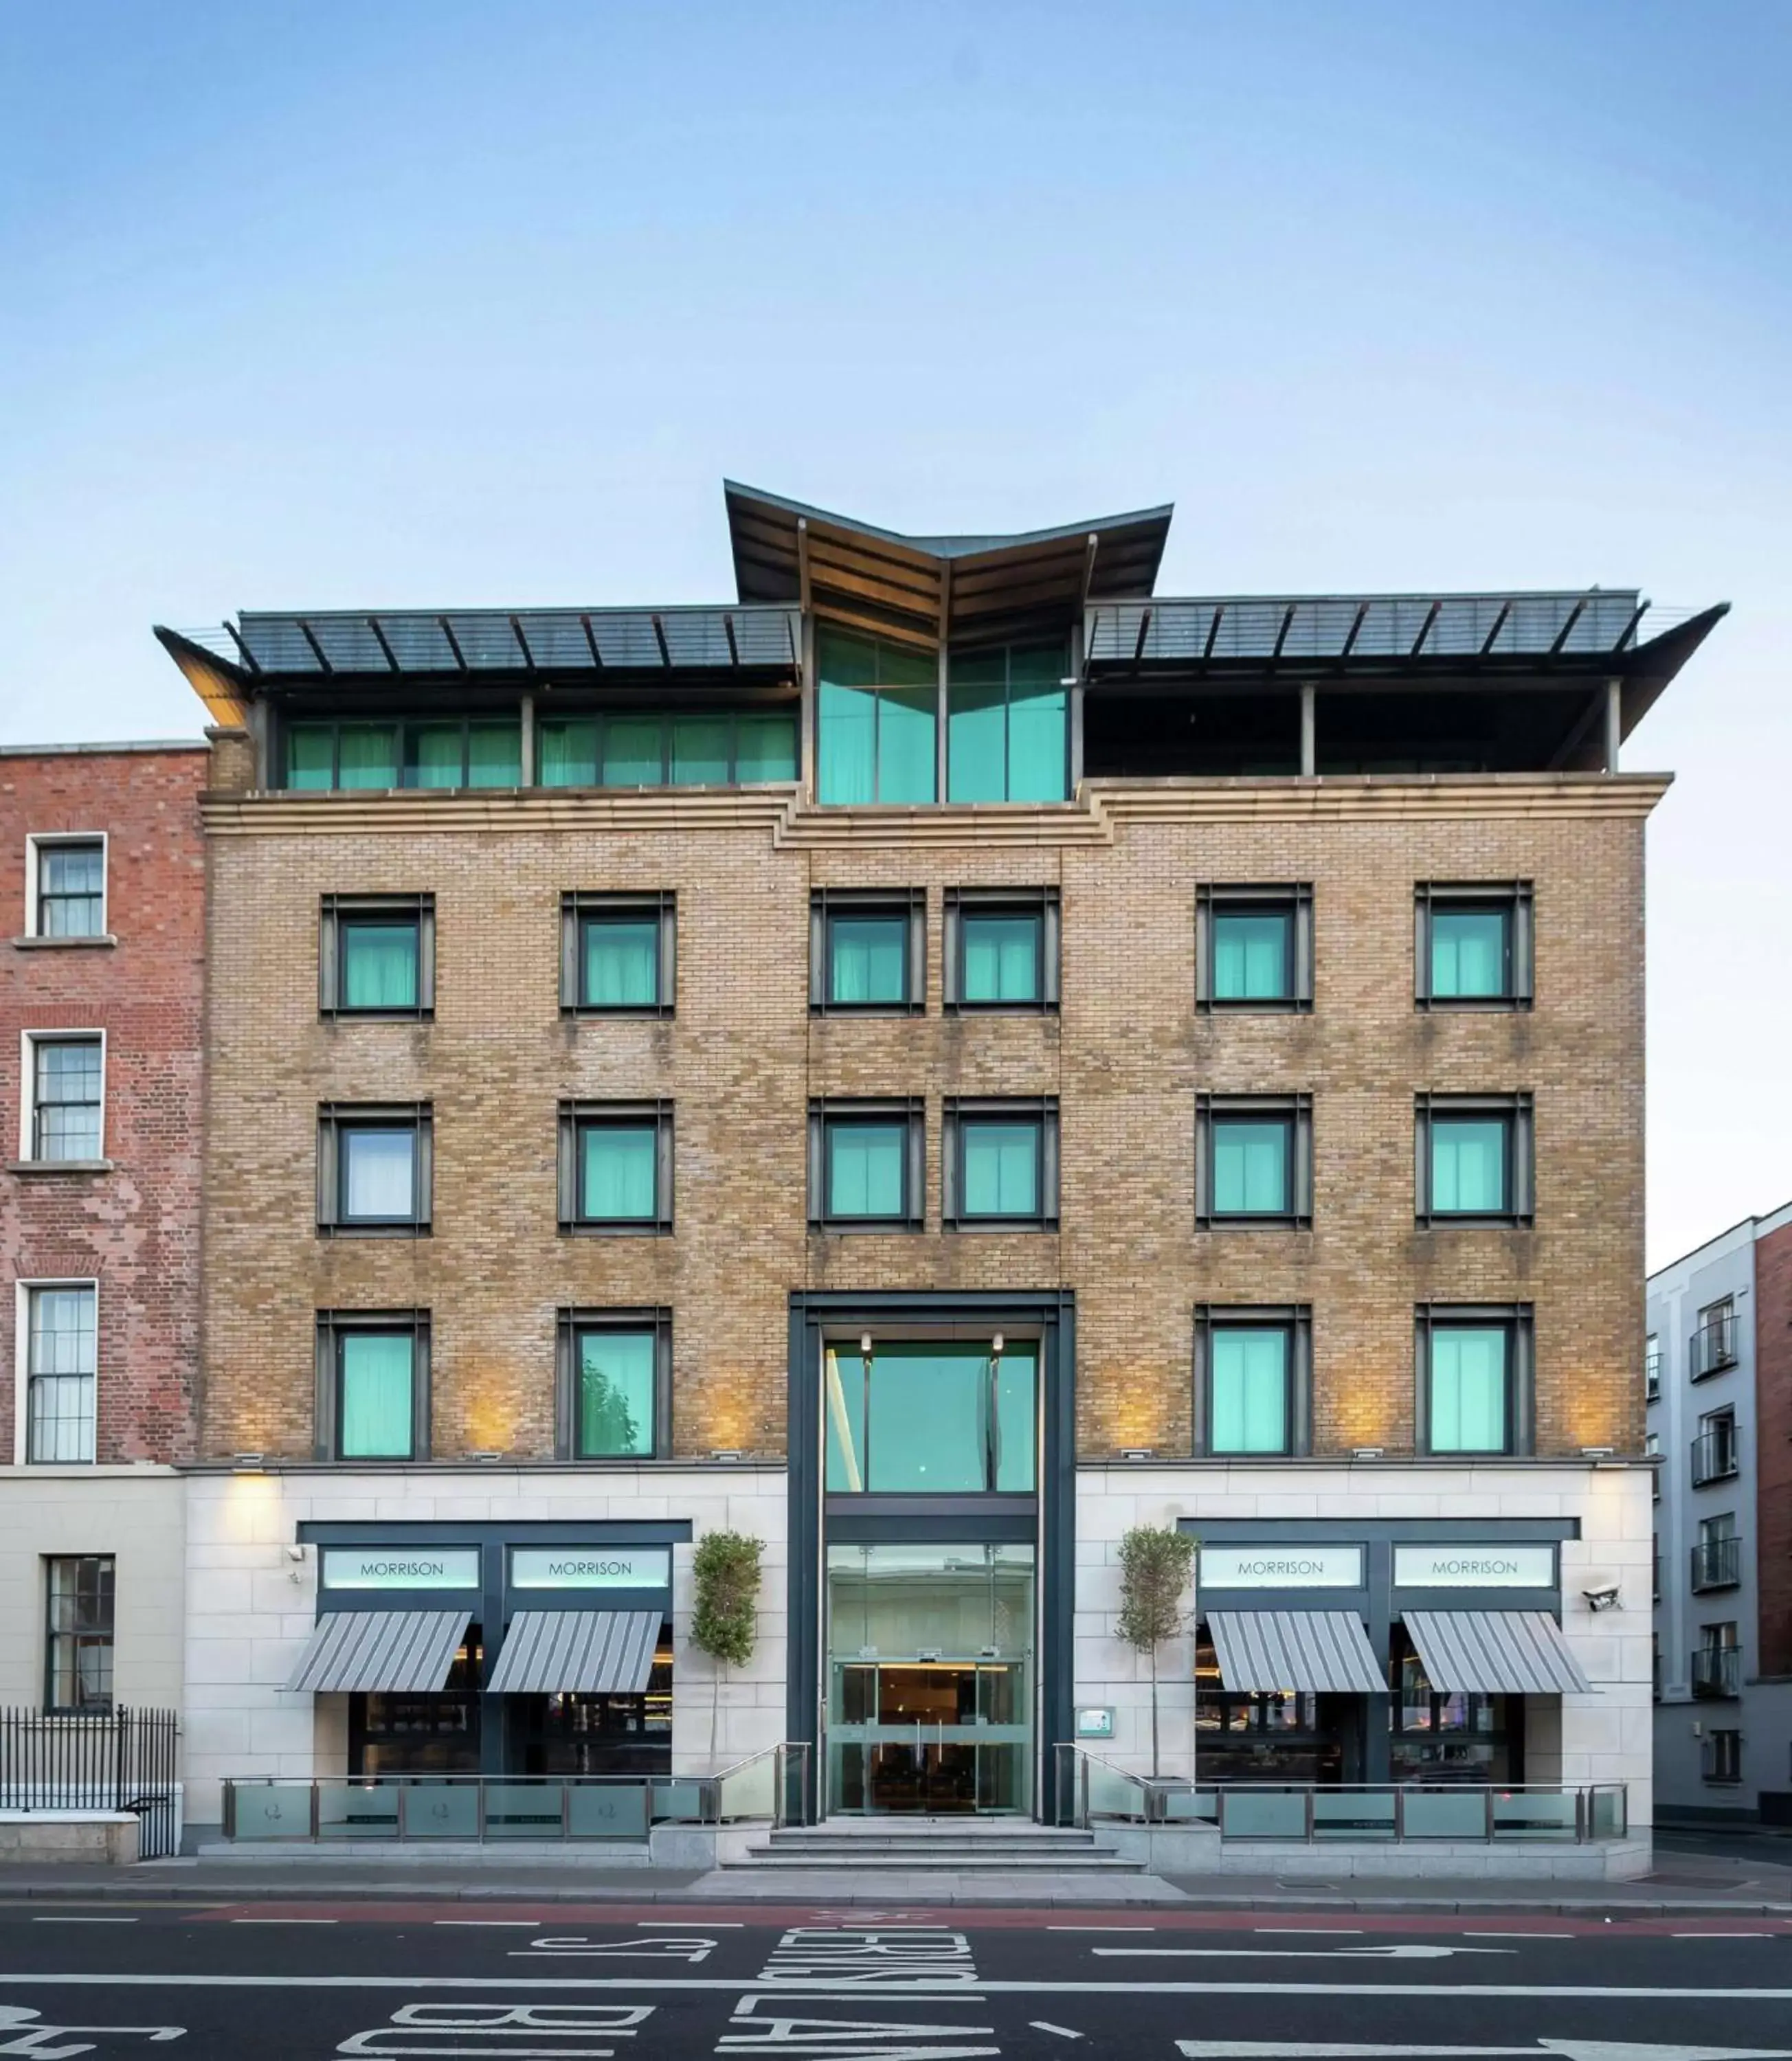 Property Building in The Morrison Dublin, Curio Collection by Hilton